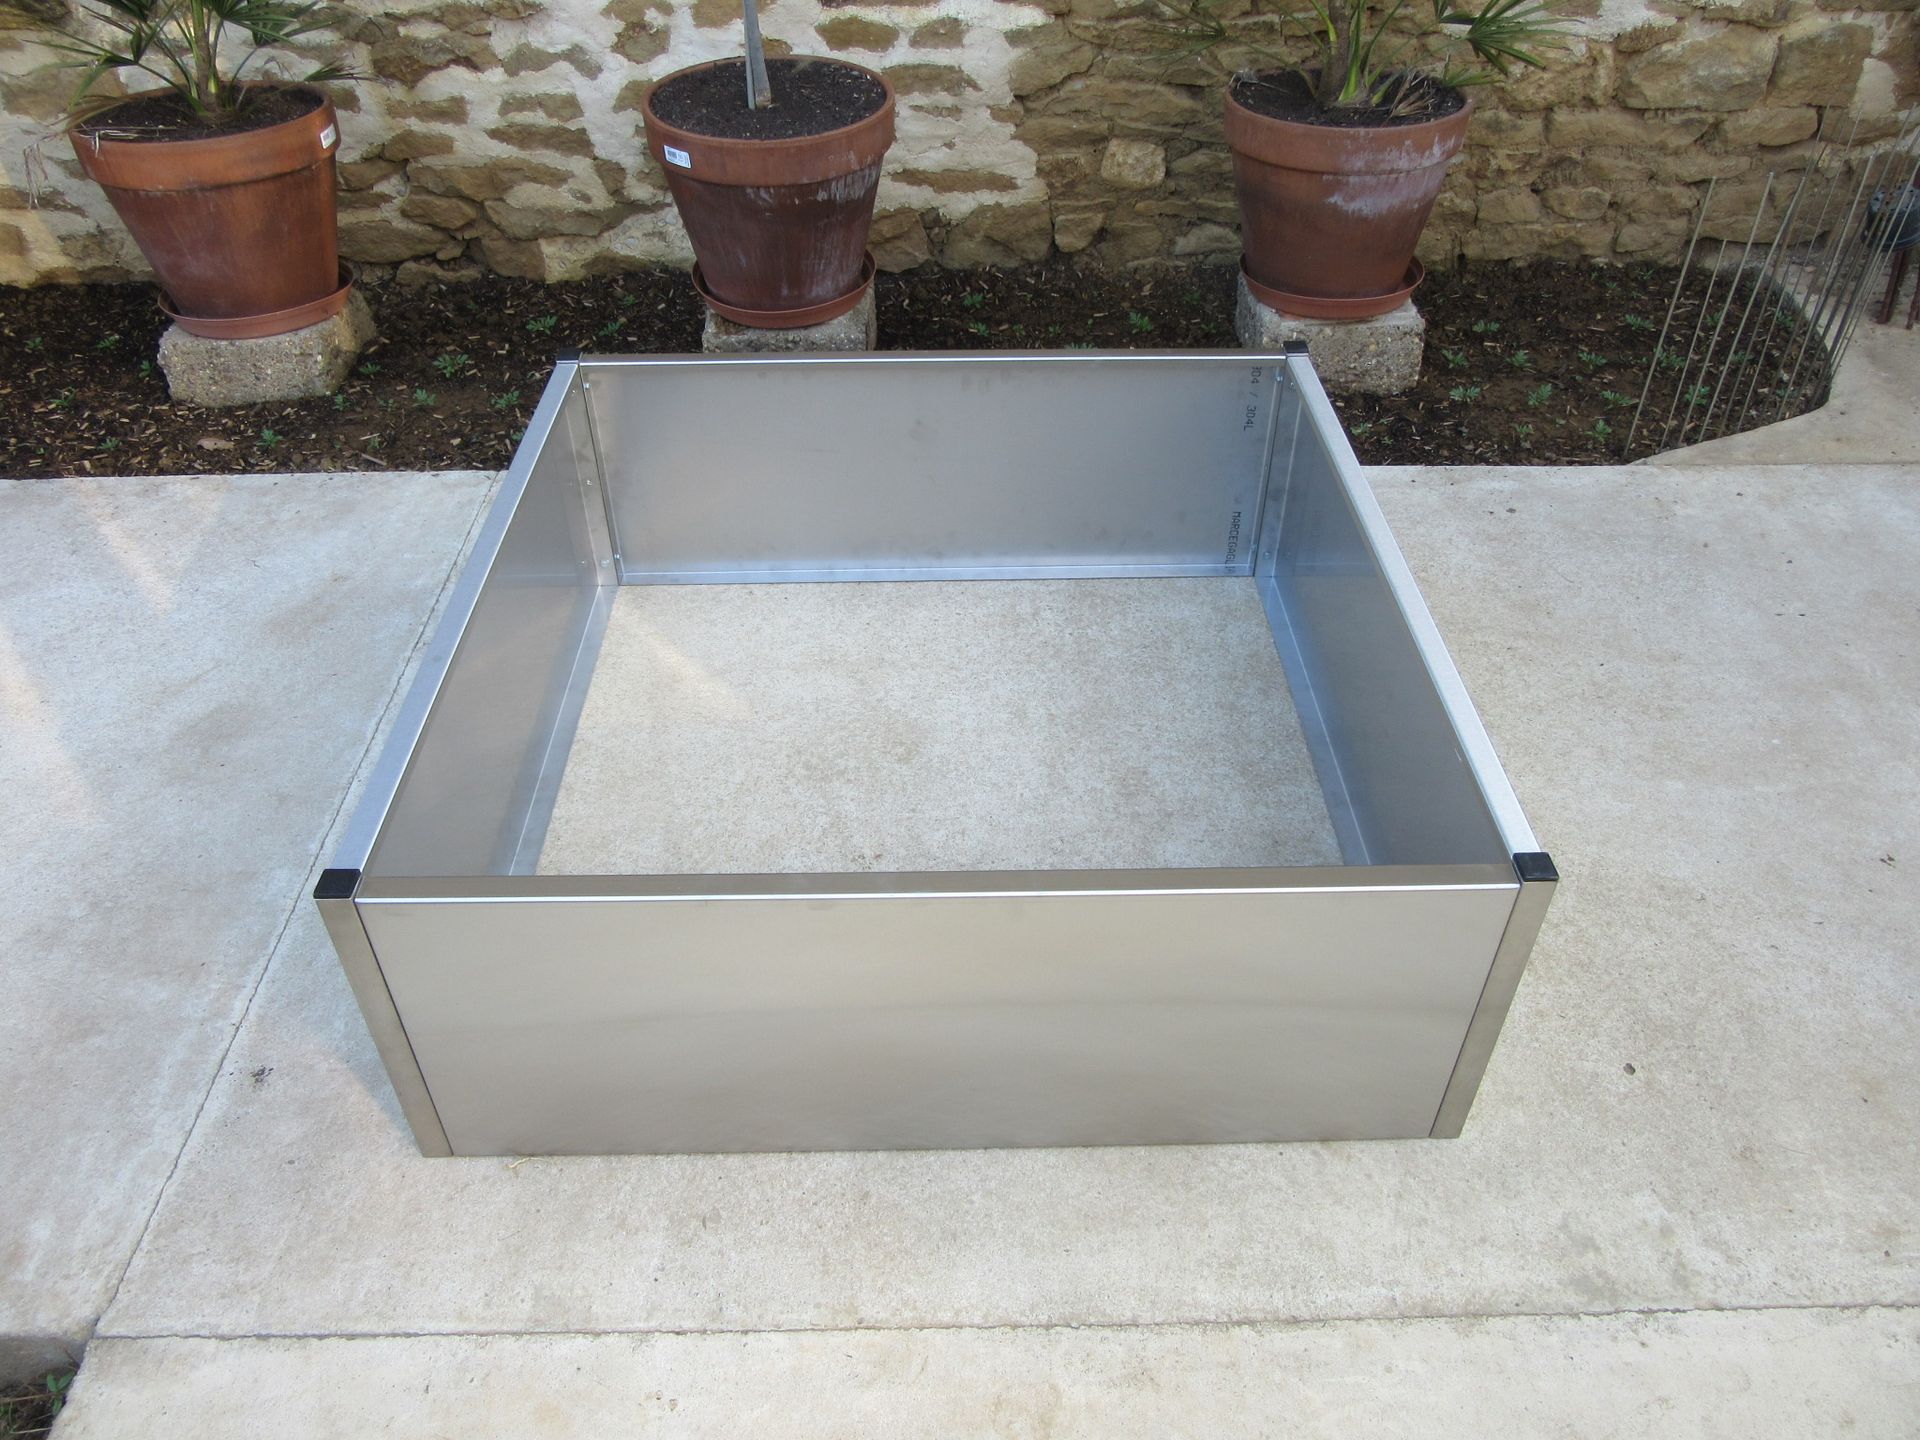 Stainless steel raised flower bed for garden or patio